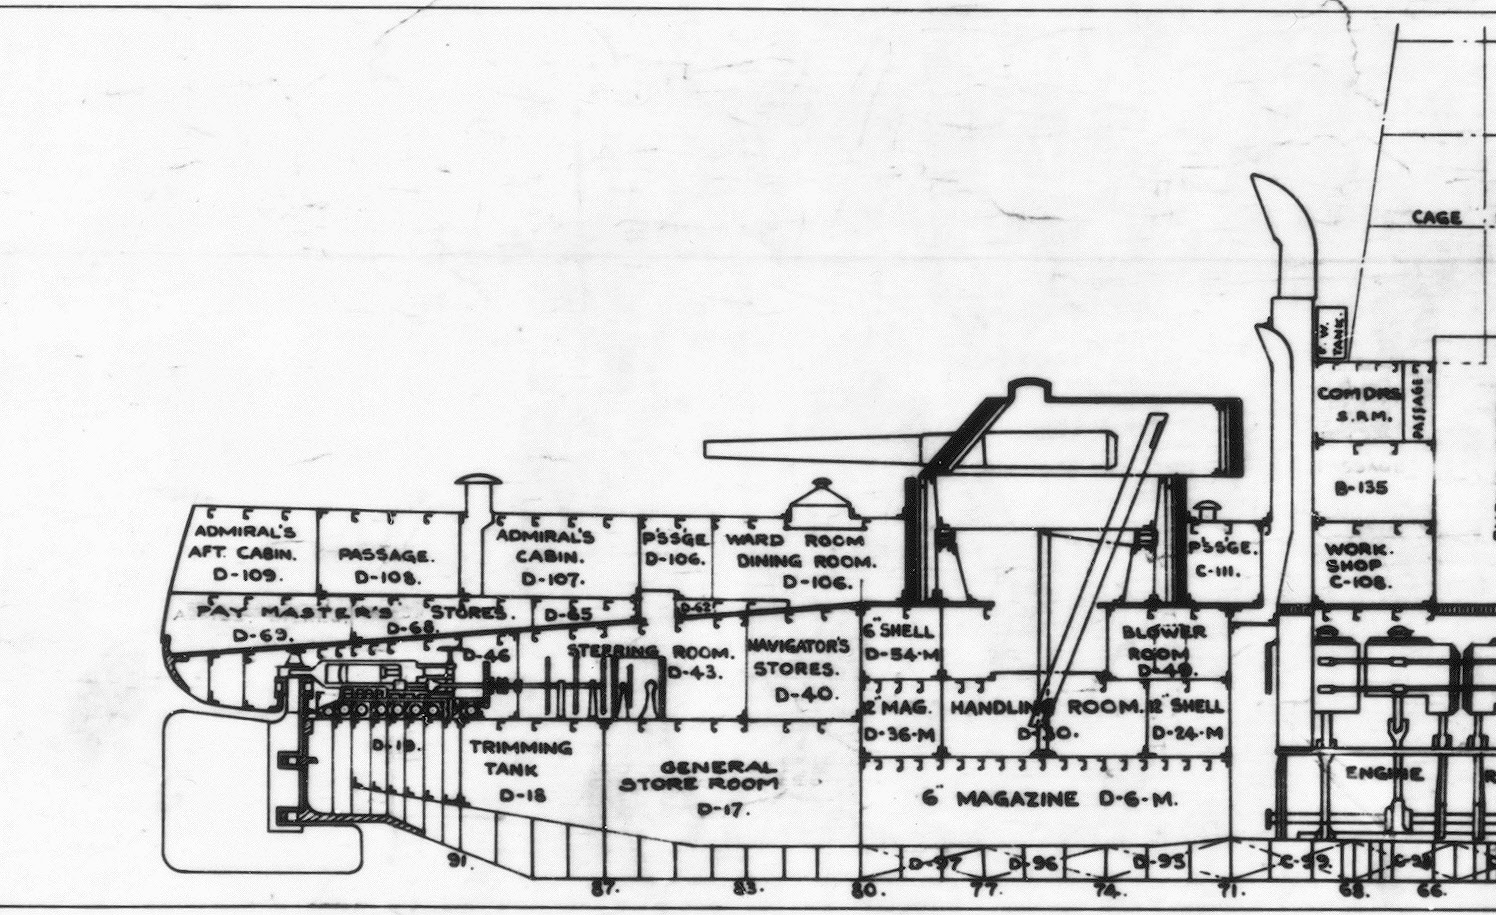 Inboard Profile of stern section of USS Ohio (BB-12)